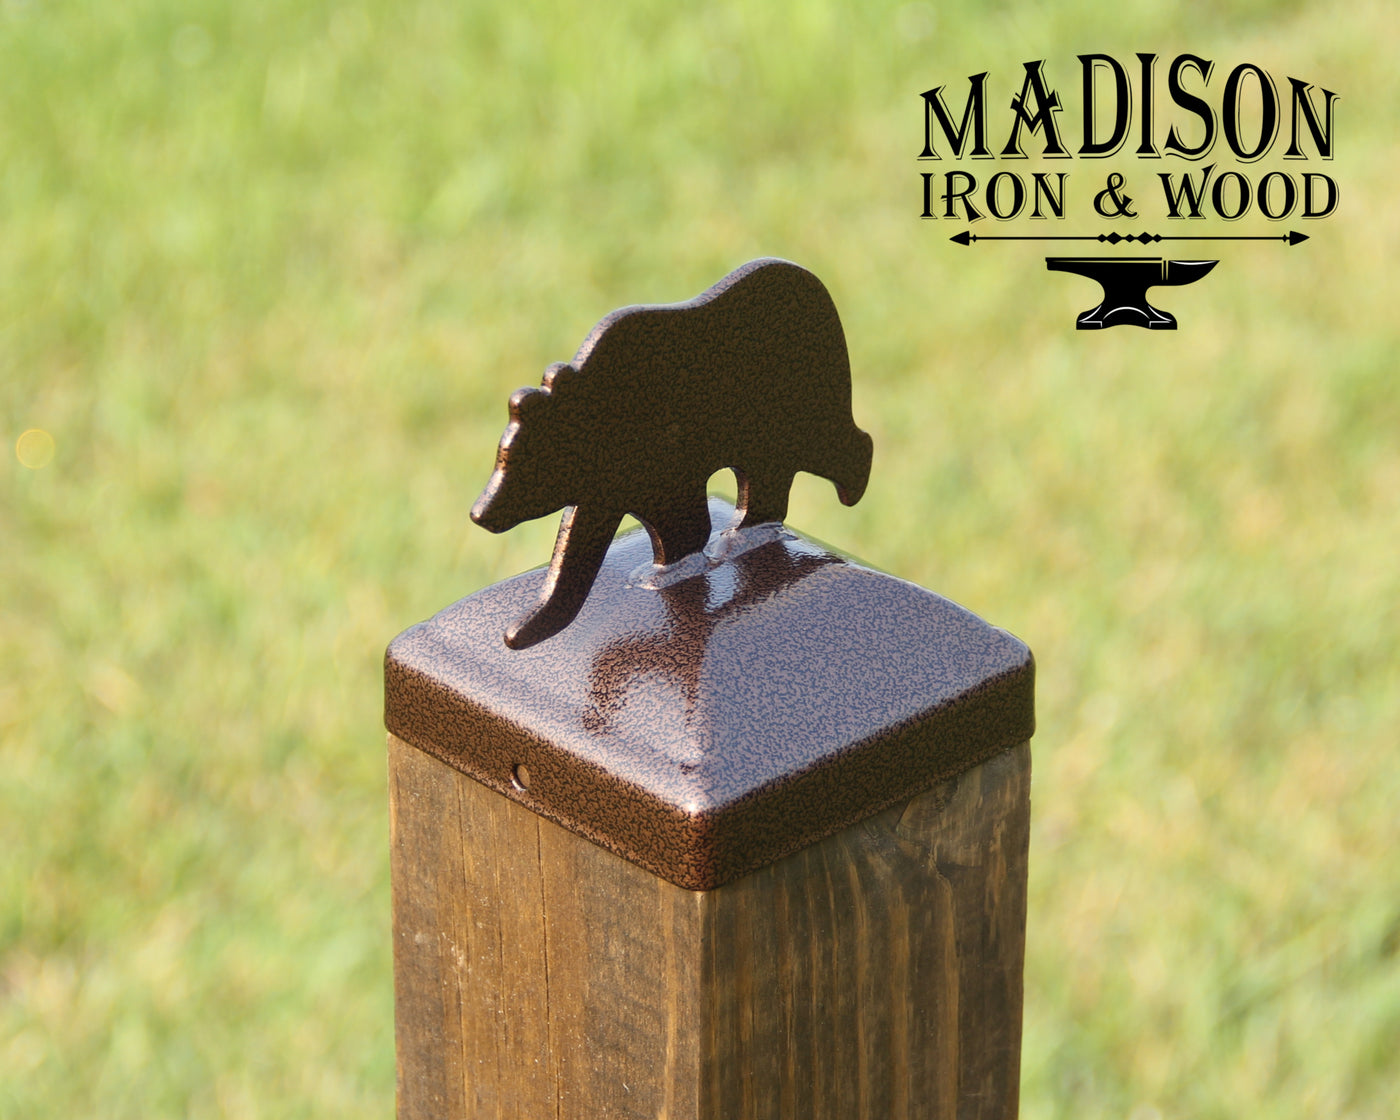 4x4 Bear Post Cap - Madison Iron and Wood - Post Cap - metal outdoor decor - Steel deocrations - american made products - veteran owned business products - fencing decorations - fencing supplies - custom wall decorations - personalized wall signs - steel - decorative post caps - steel post caps - metal post caps - brackets - structural brackets - home improvement - easter - easter decorations - easter gift - easter yard decor